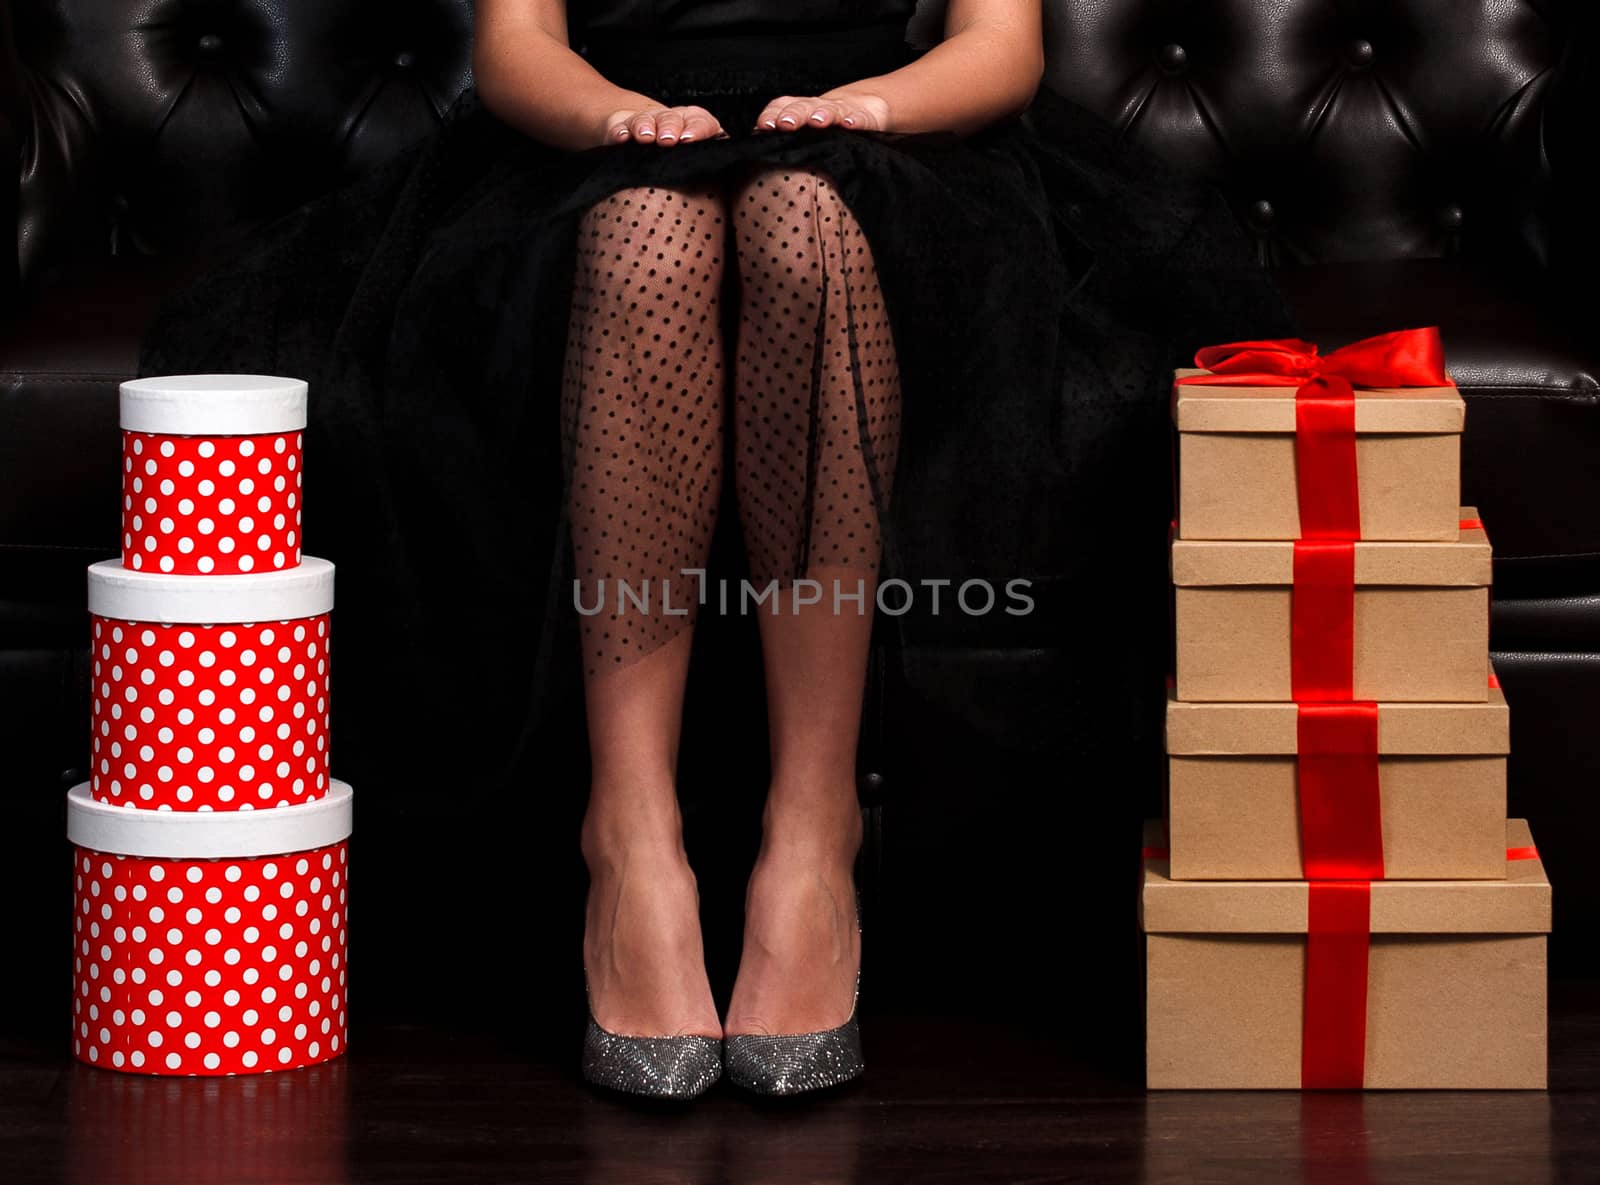 Pretty woman sittin on leather sofa between stacks of presents by Nobilior